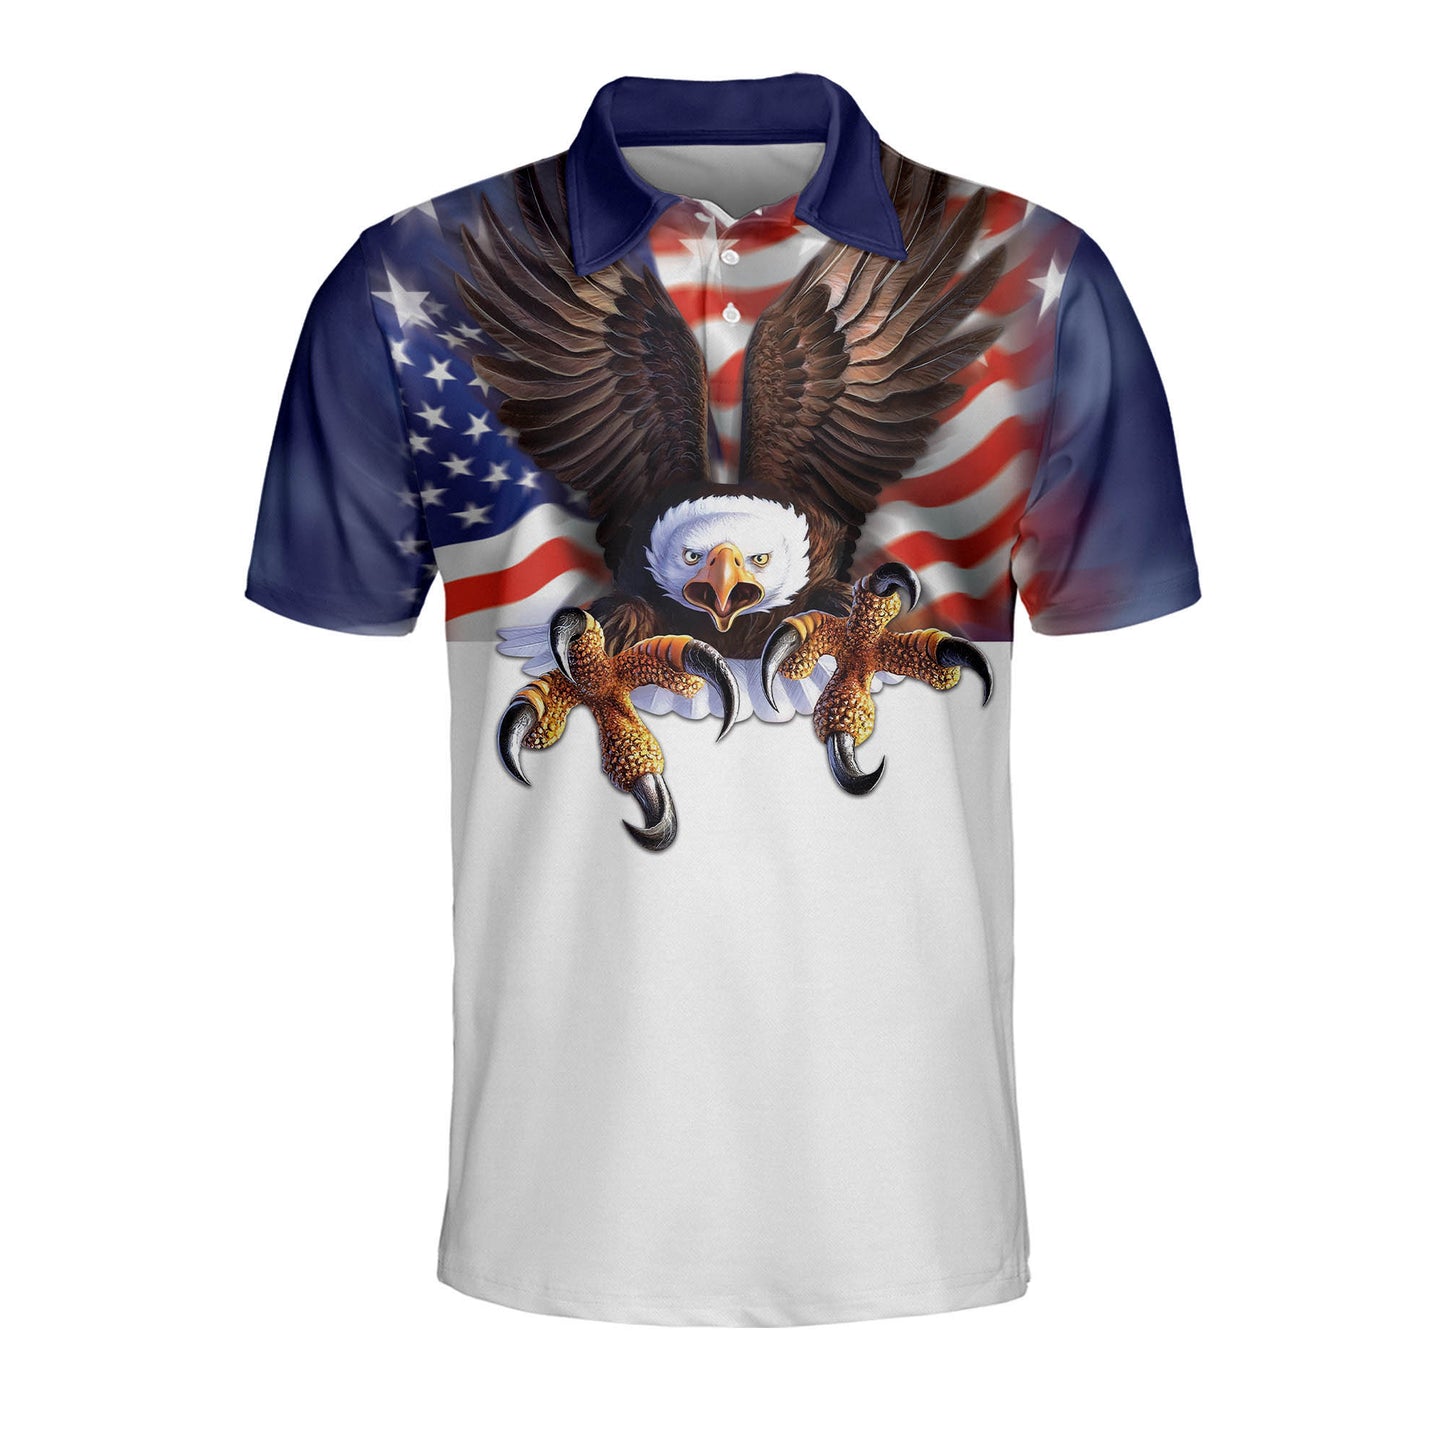 Proud To Be An American US Flag With Eagle Patriotic Polo Shirt EG0008